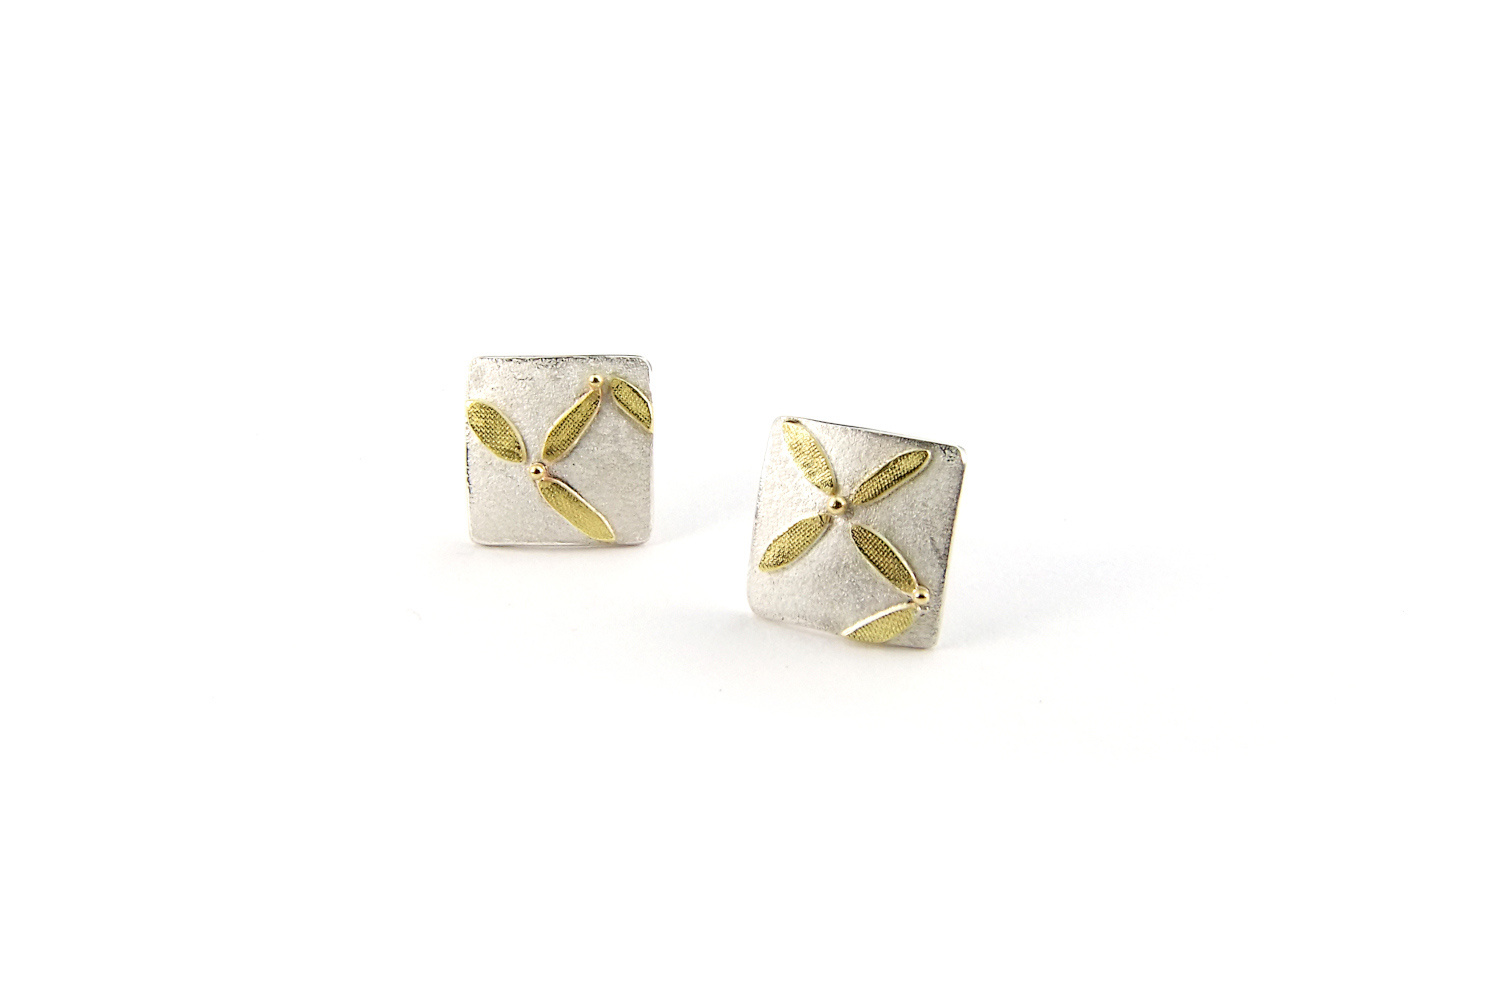 Square Earstuds with irregular Gold Pattern by Hendrike Barz-Meltzer